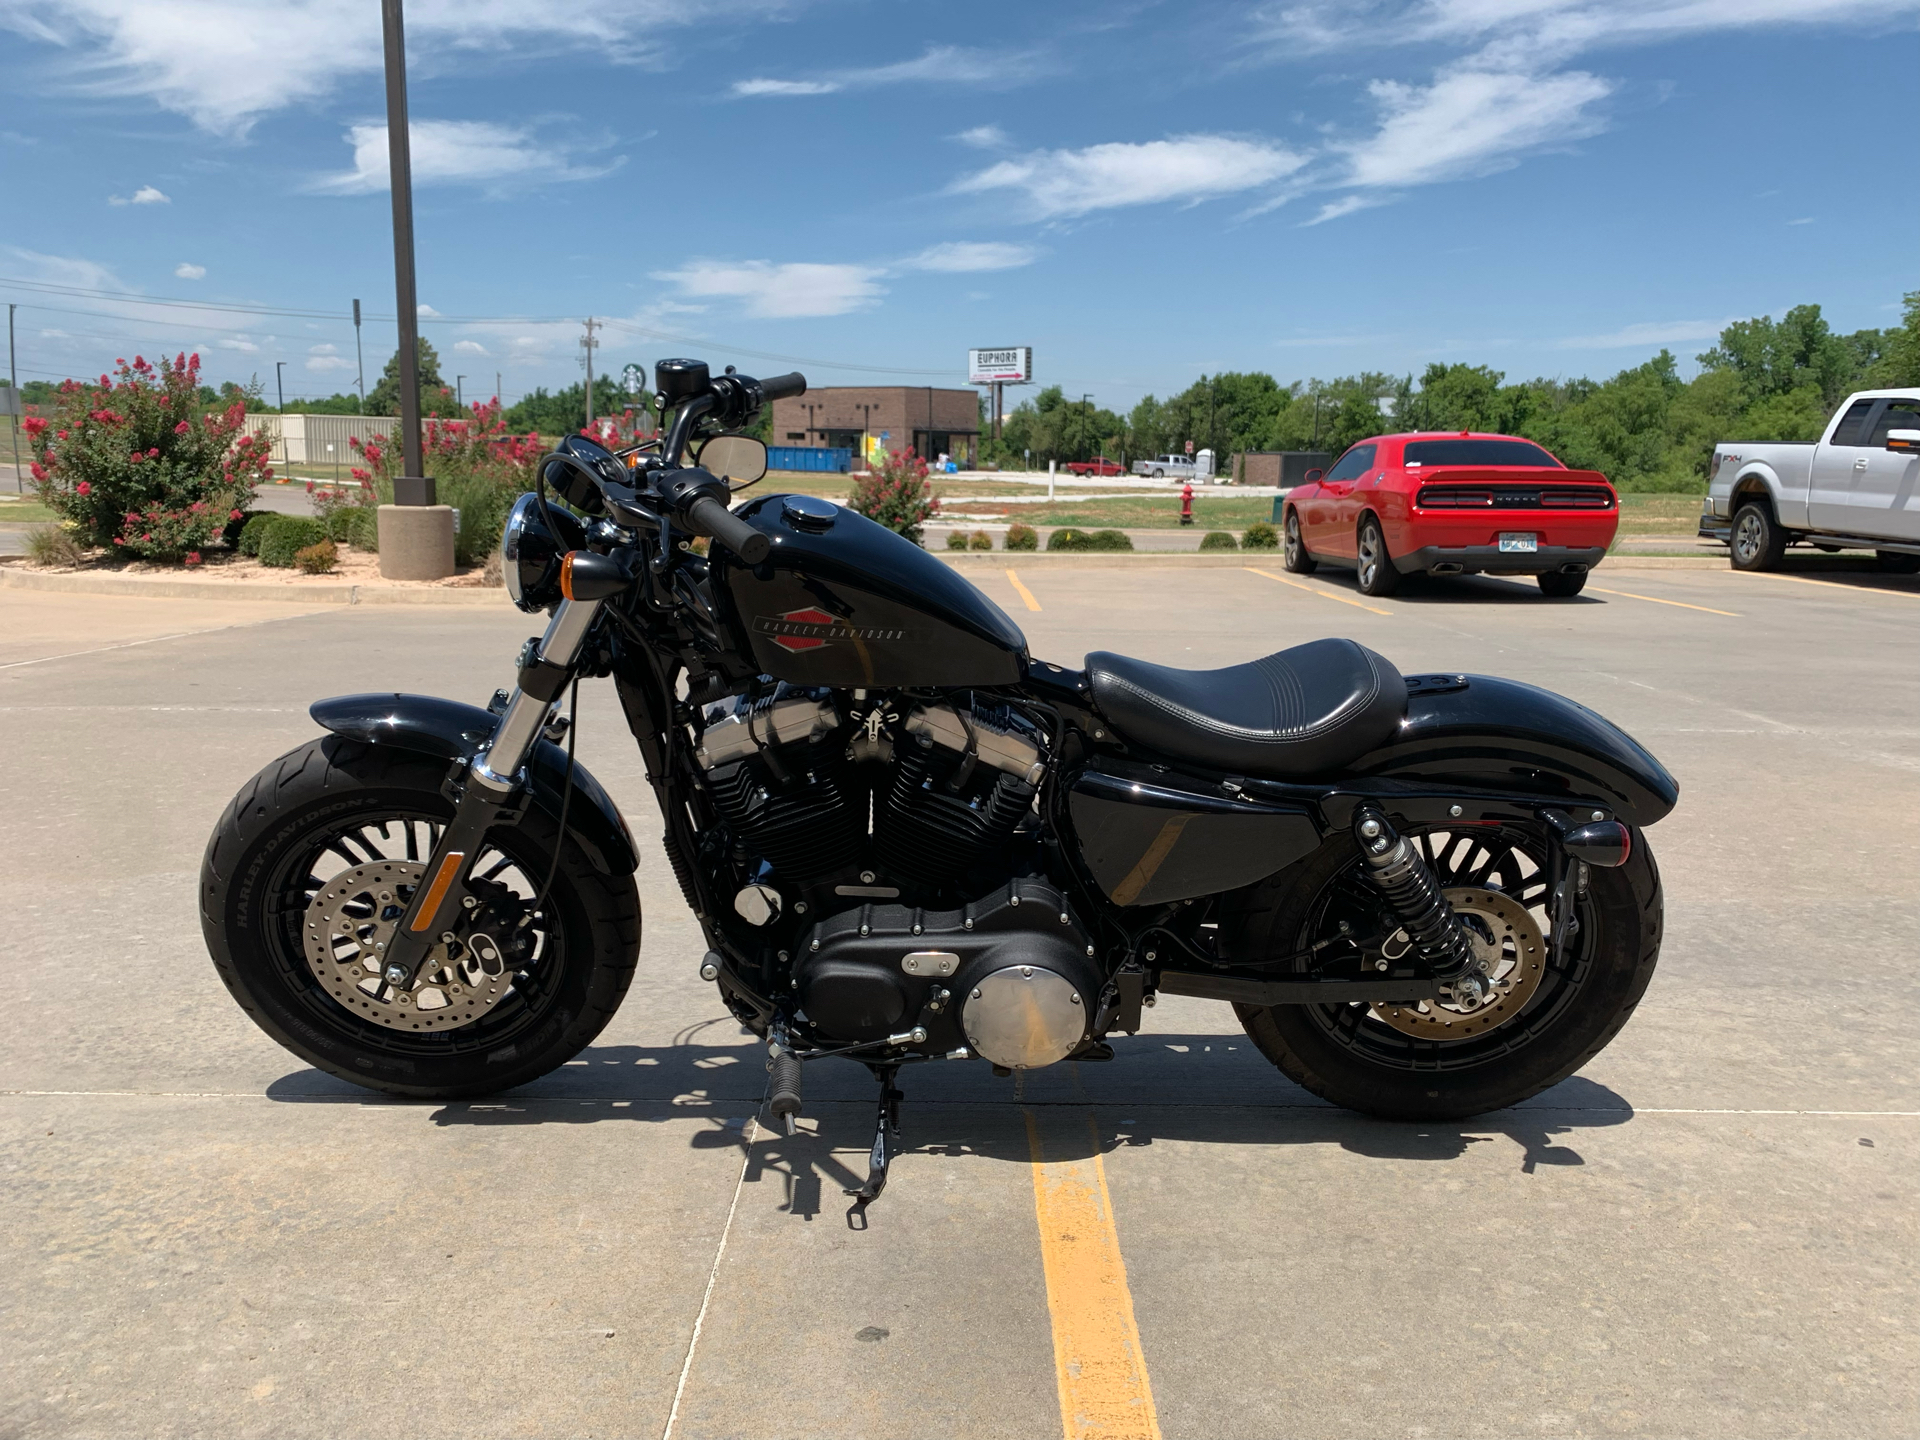 2019 Harley-Davidson Forty-Eight® in Norman, Oklahoma - Photo 5